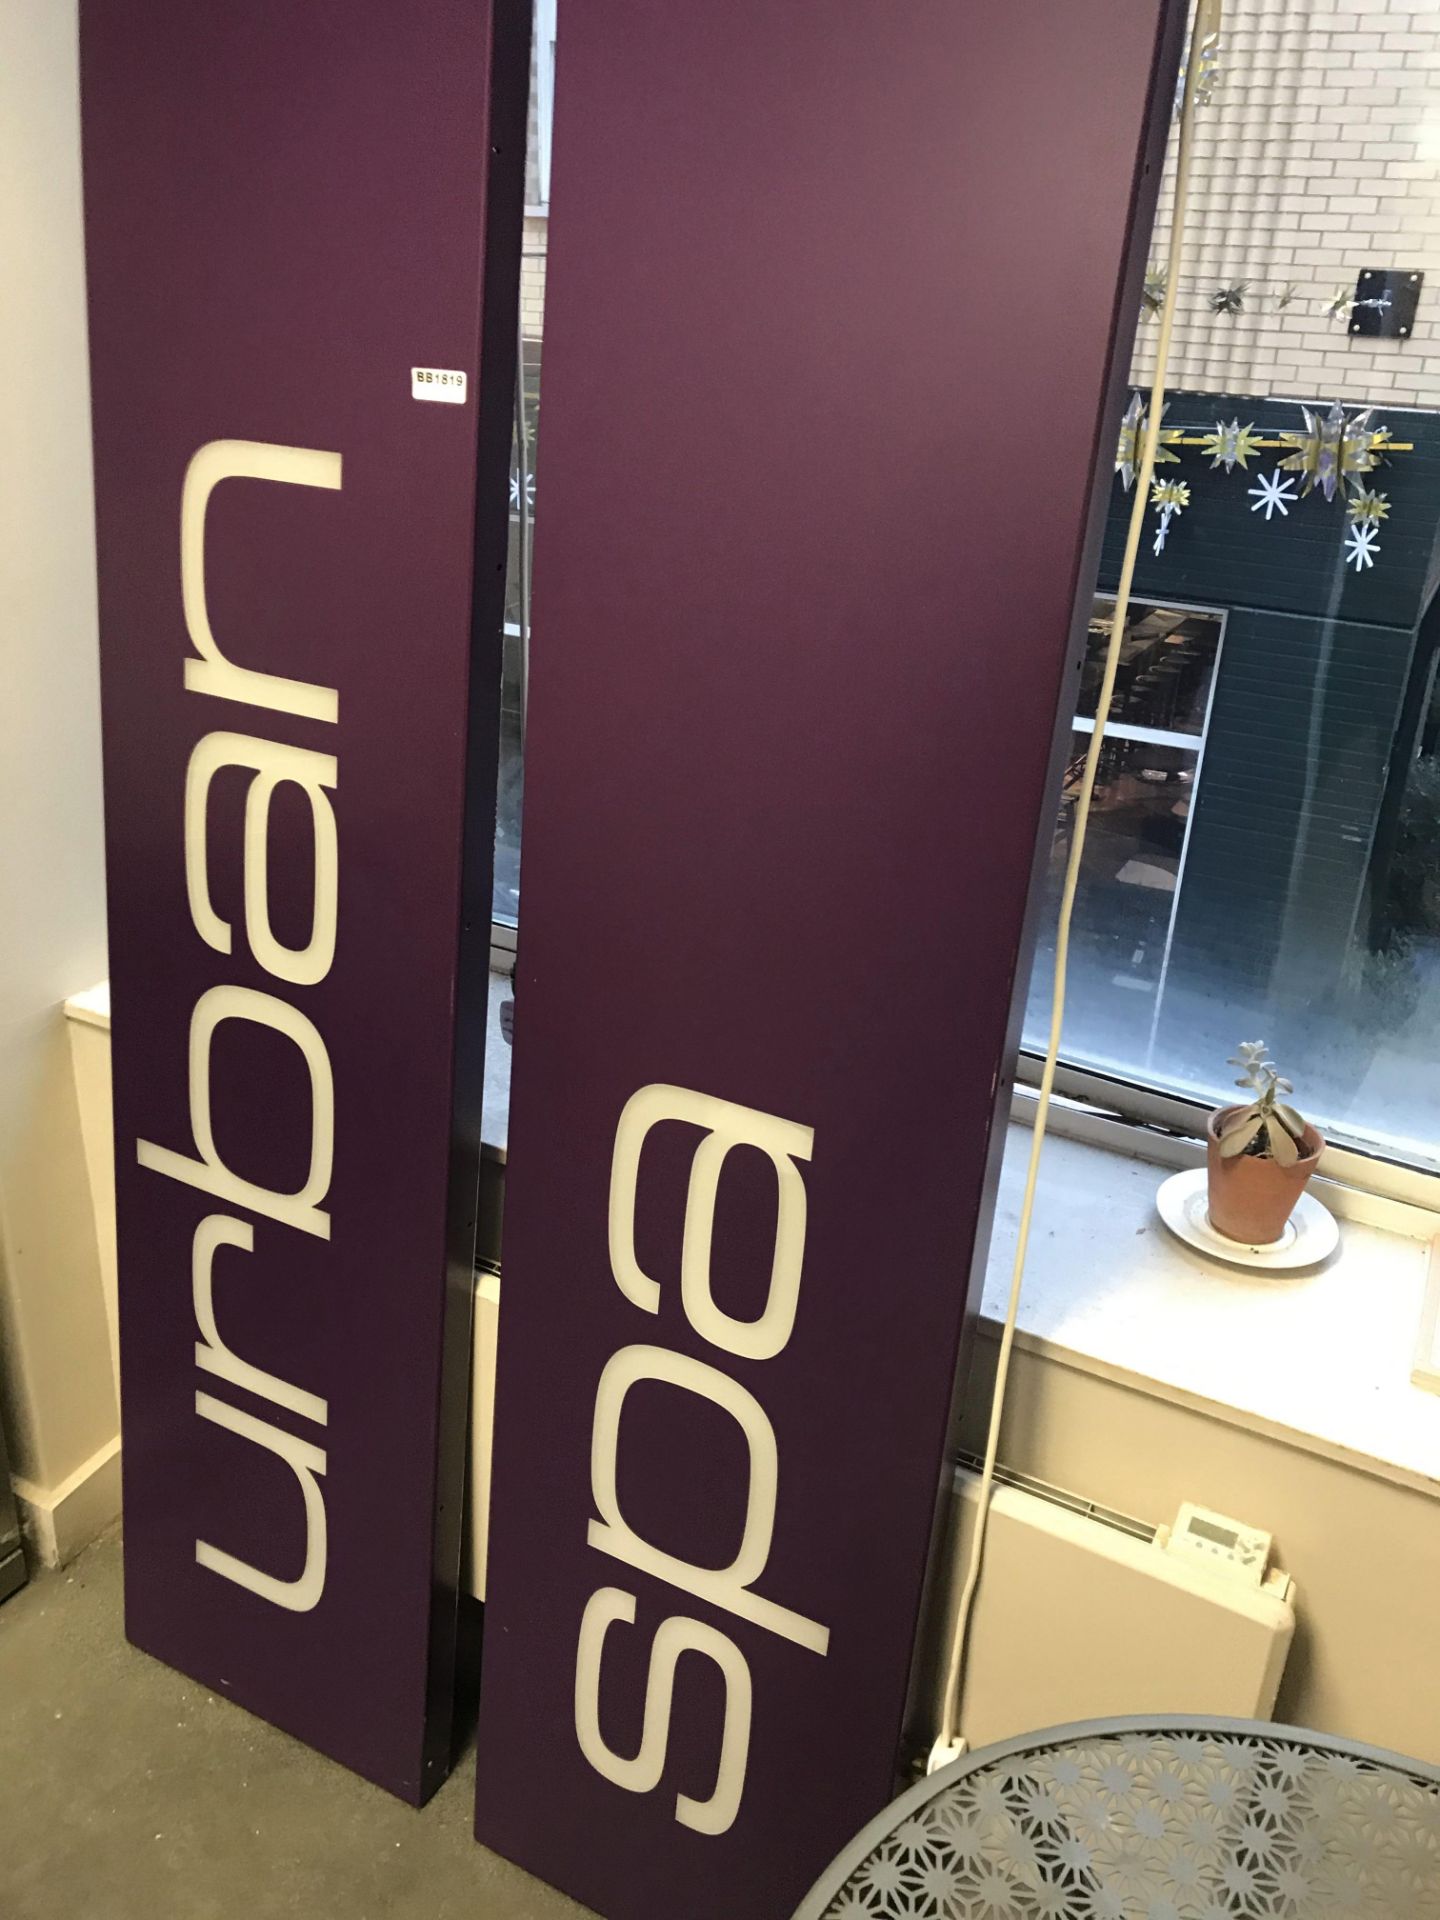 2 x Large Illumatinated Bespoke Light Boxes - URBAN SPA - Contemporary Purple Design With Cool White - Image 2 of 5